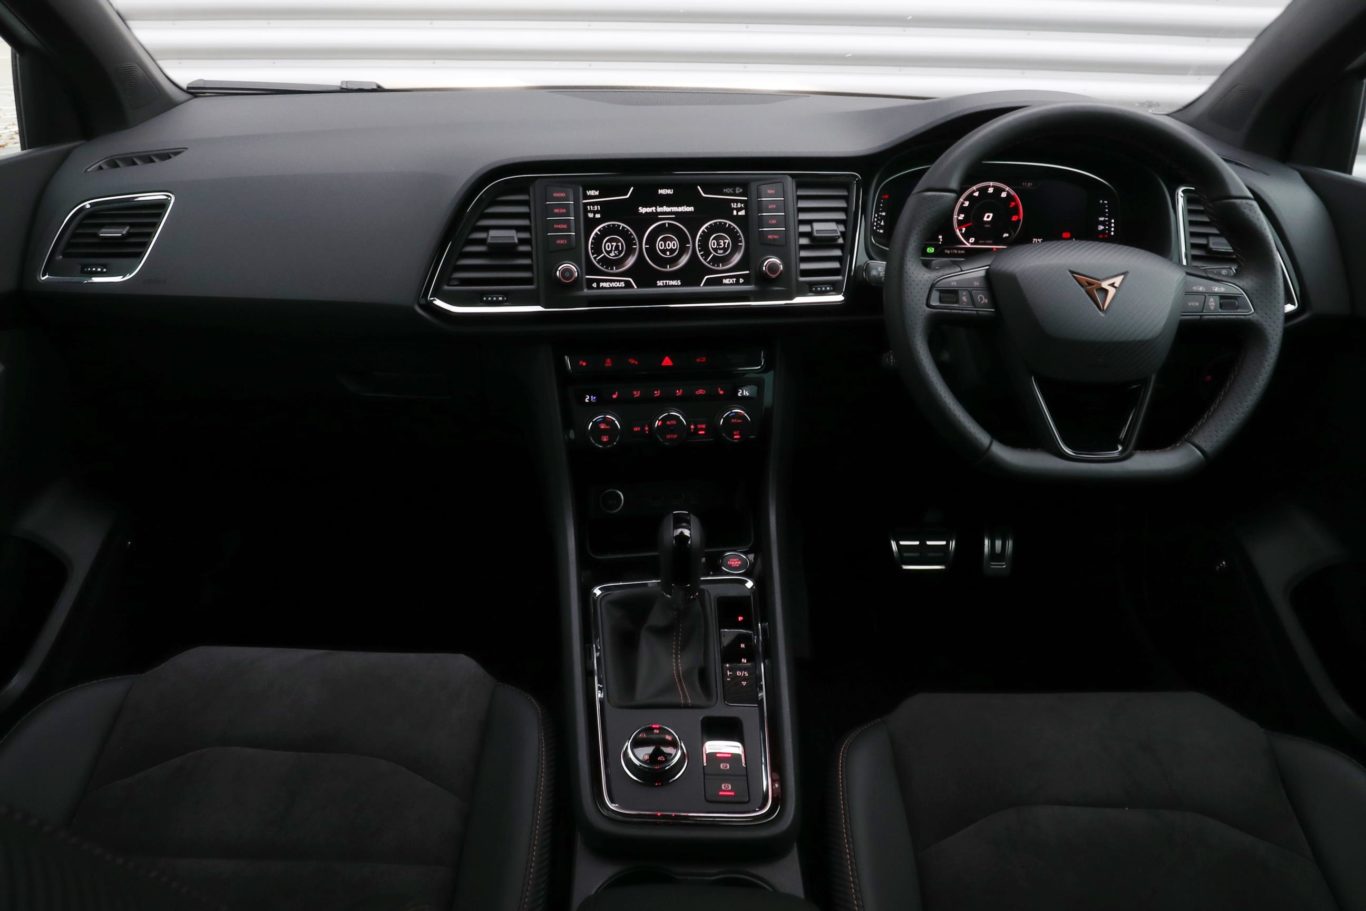 The interior feels largely unchanged over the regular Ateca